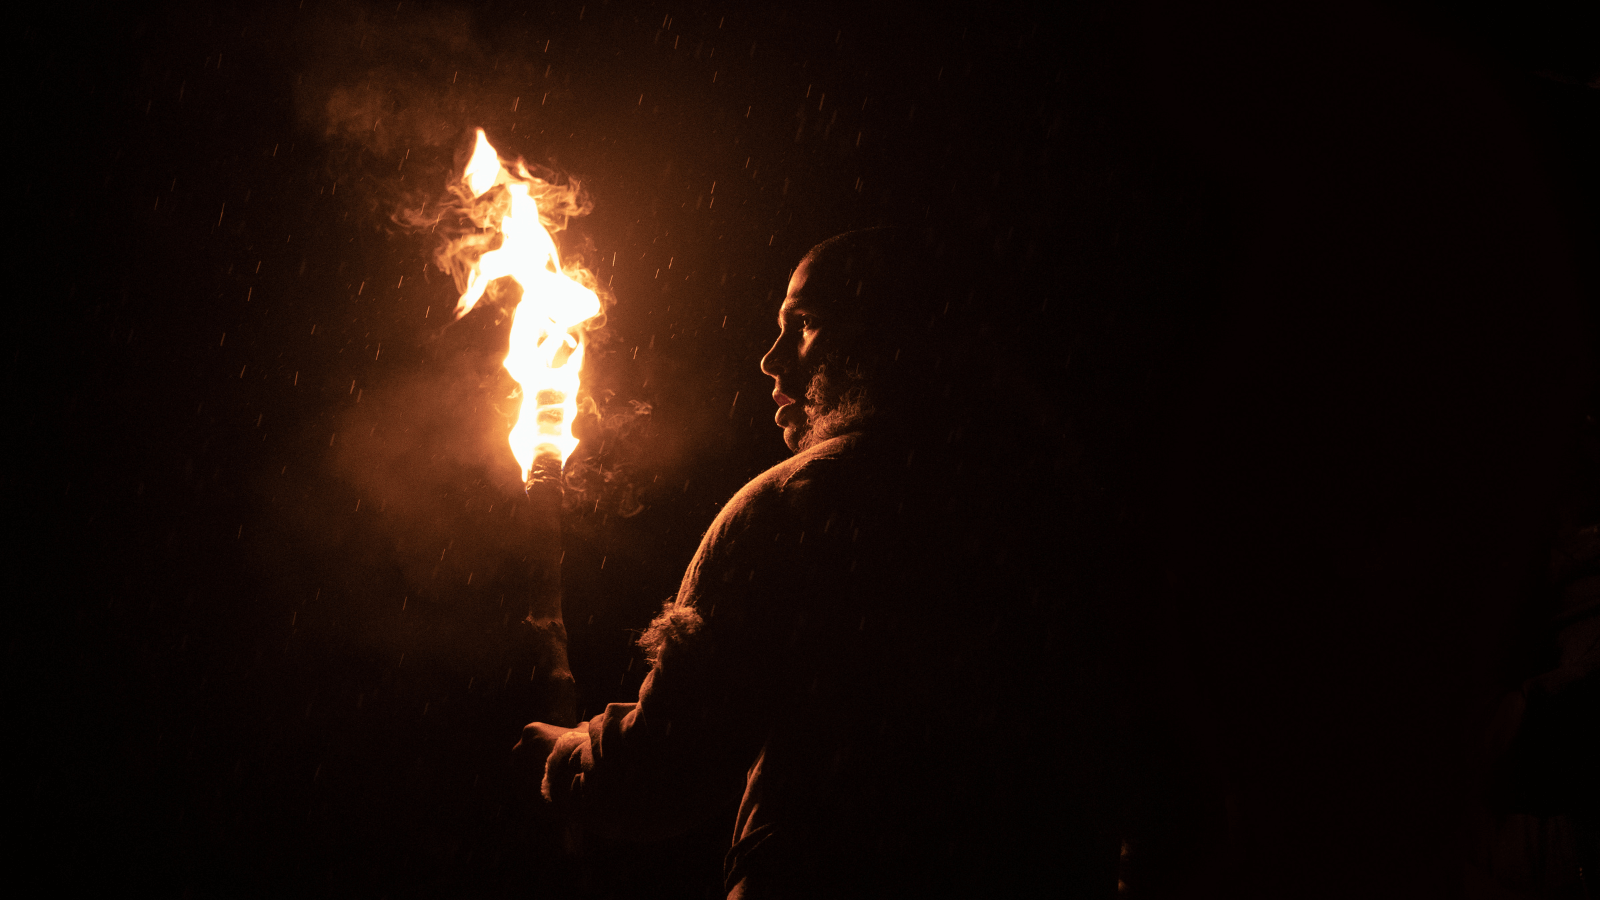 Stone Age man with fire torch